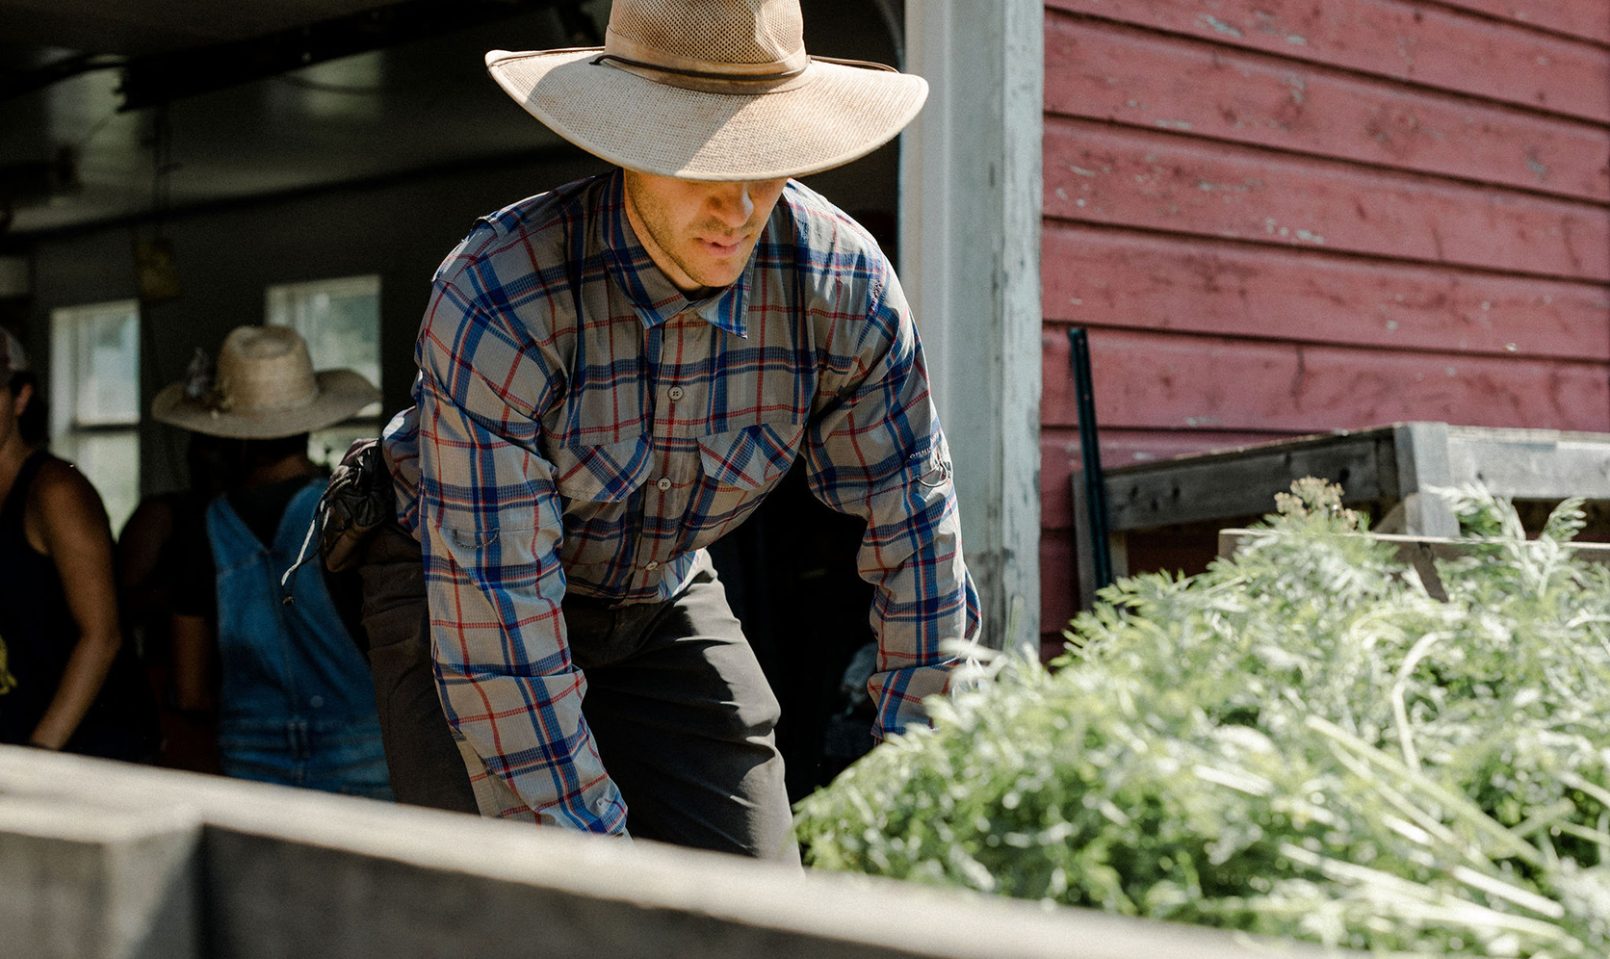 A farm member kneeling over to pick something up. A hat covers his eyes and a carton of leafy stems cover his hands.